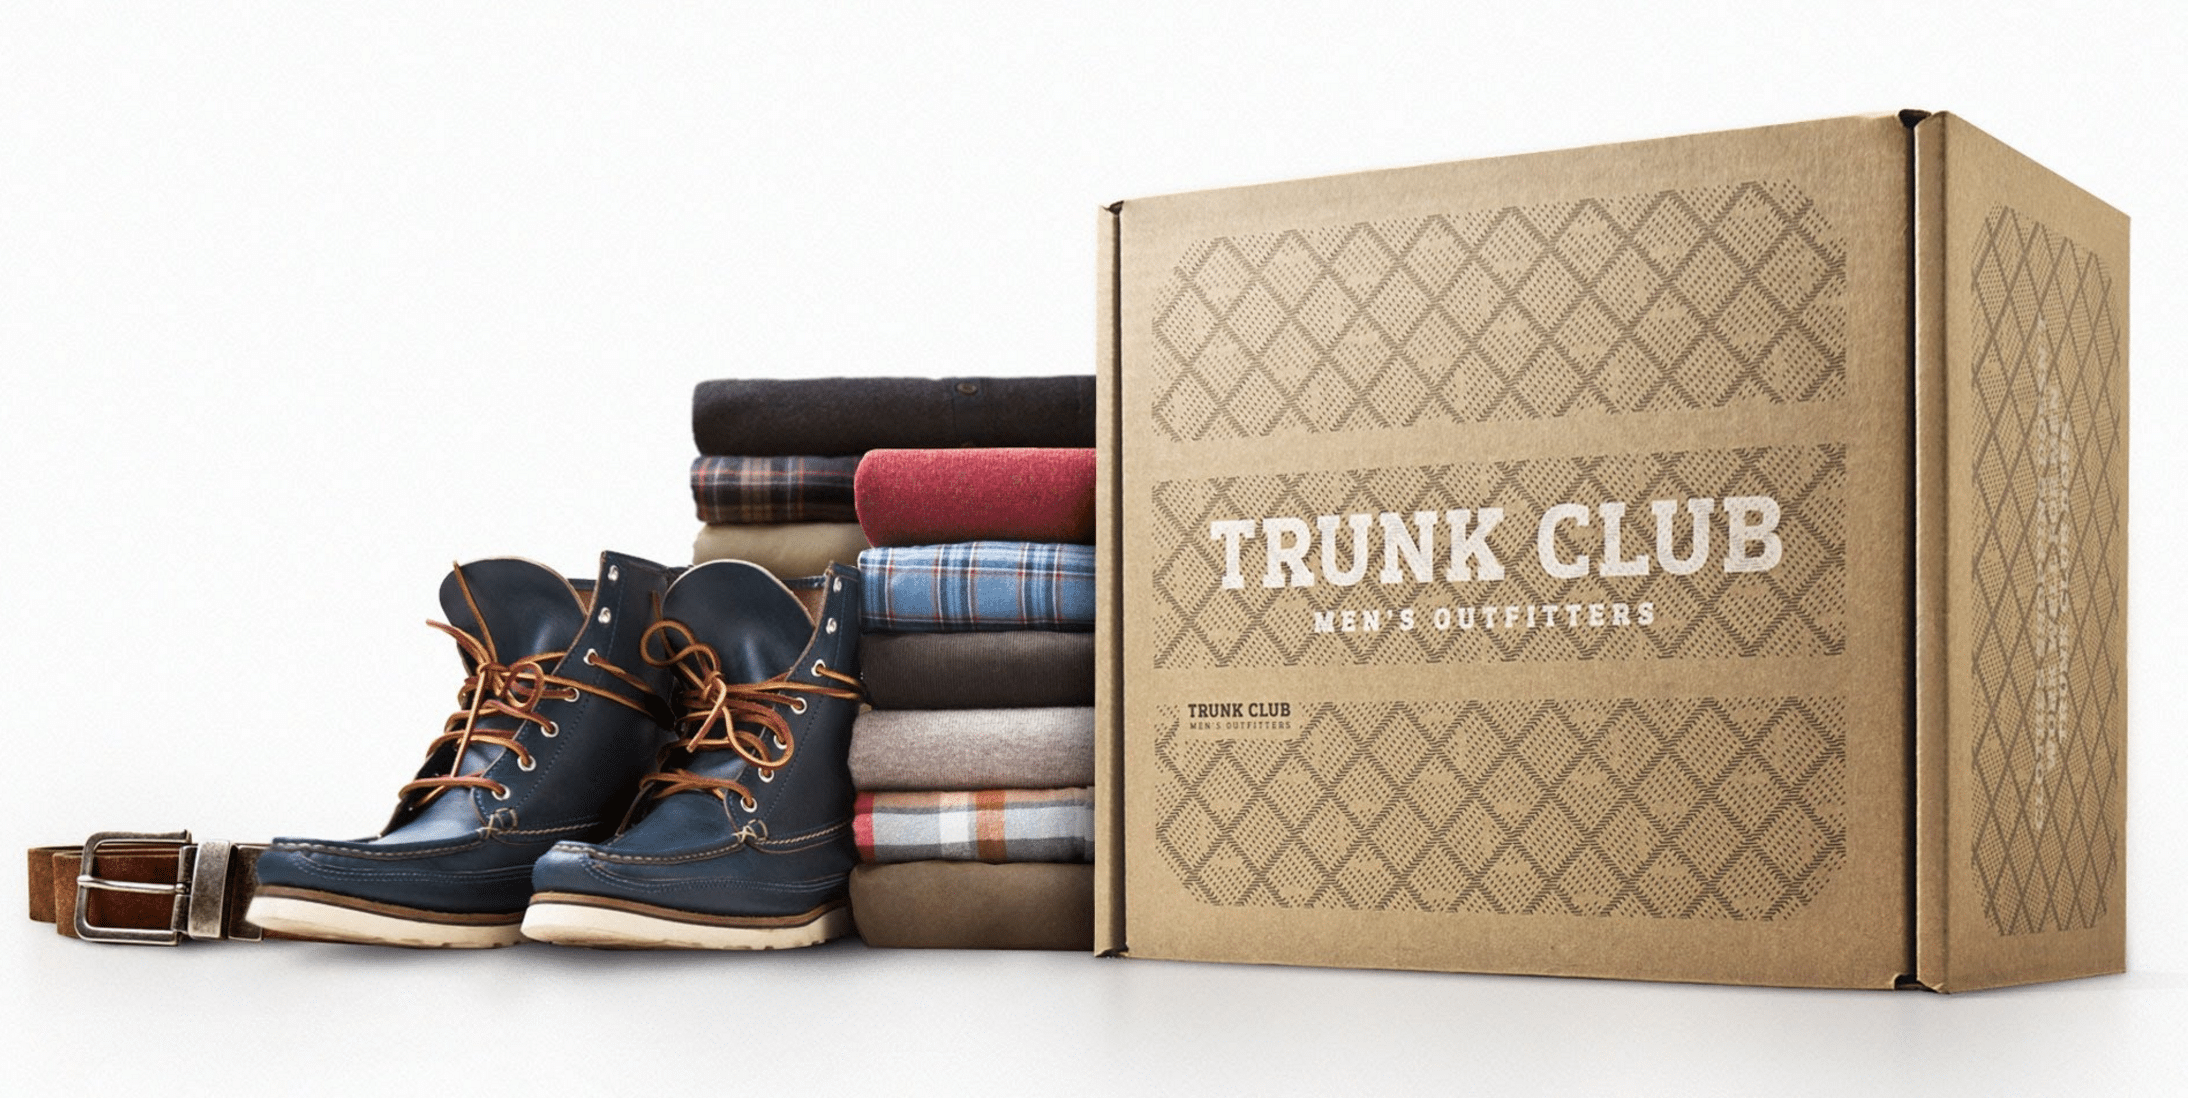 Some companies, like Trunk Club, build brand boxes as a way to delight customers and also increase the chances of being advertised on their customers' social media.